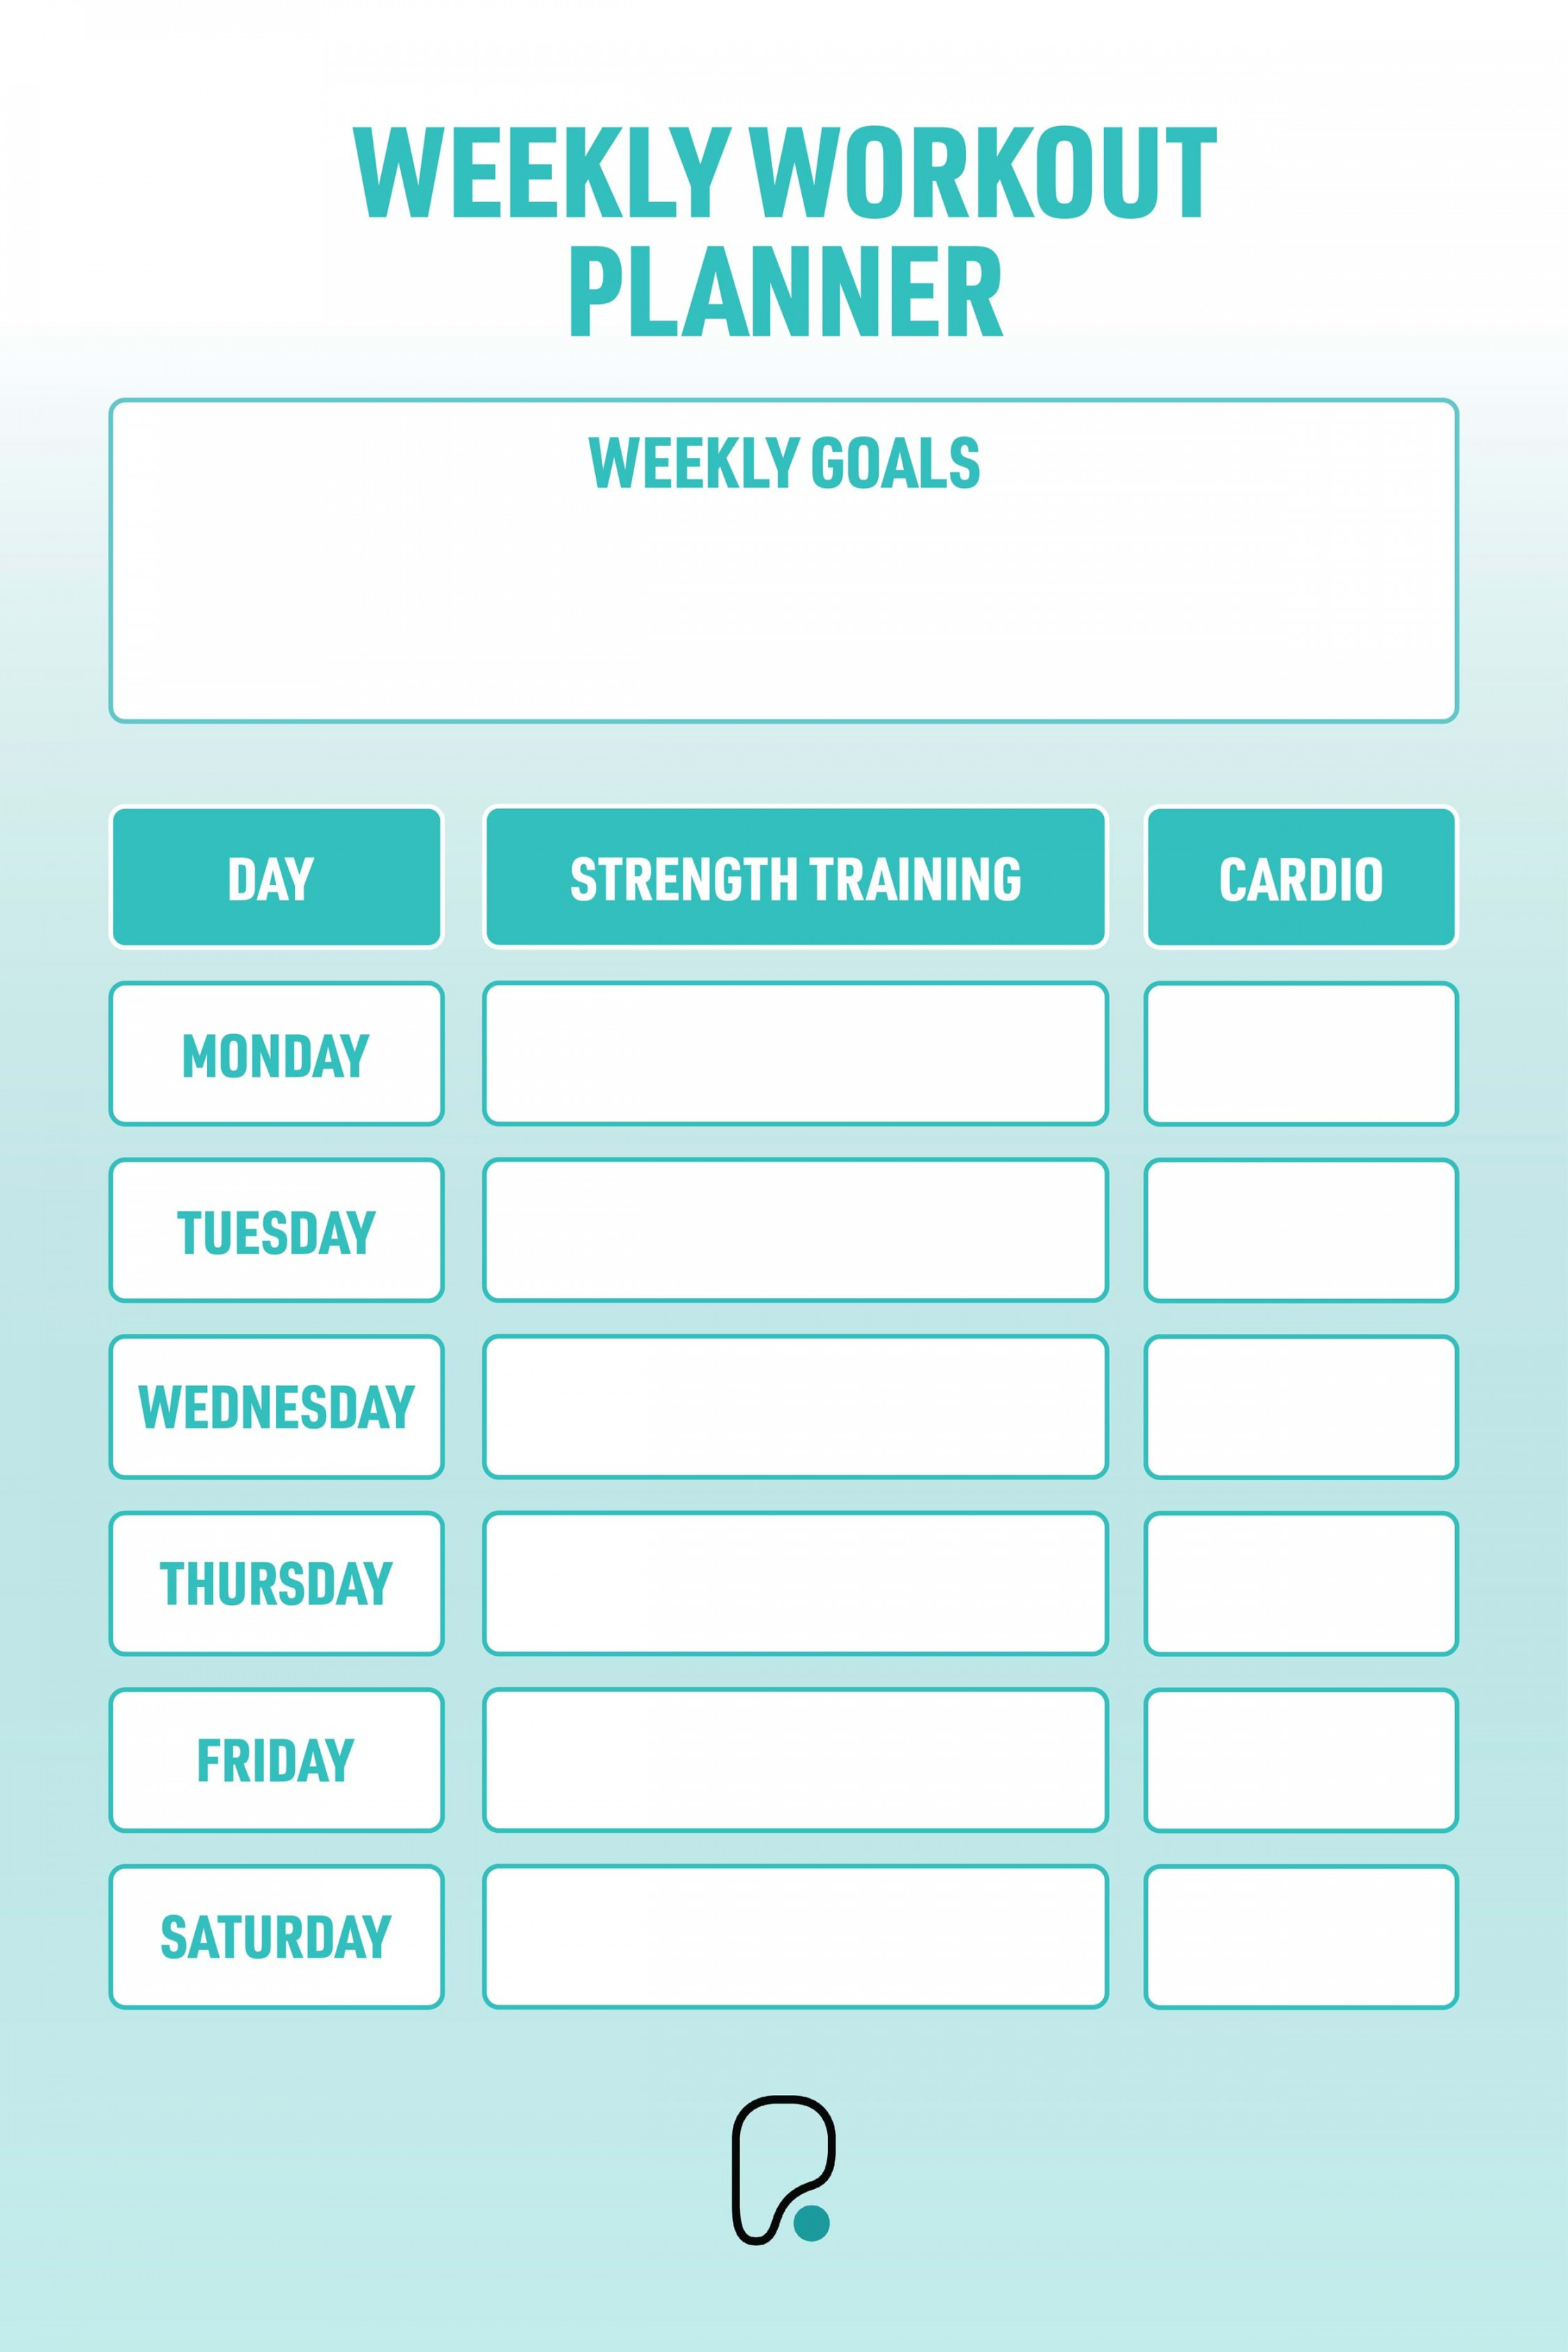 Workout Plan Templates: Download Or Make Yourself  PureGym